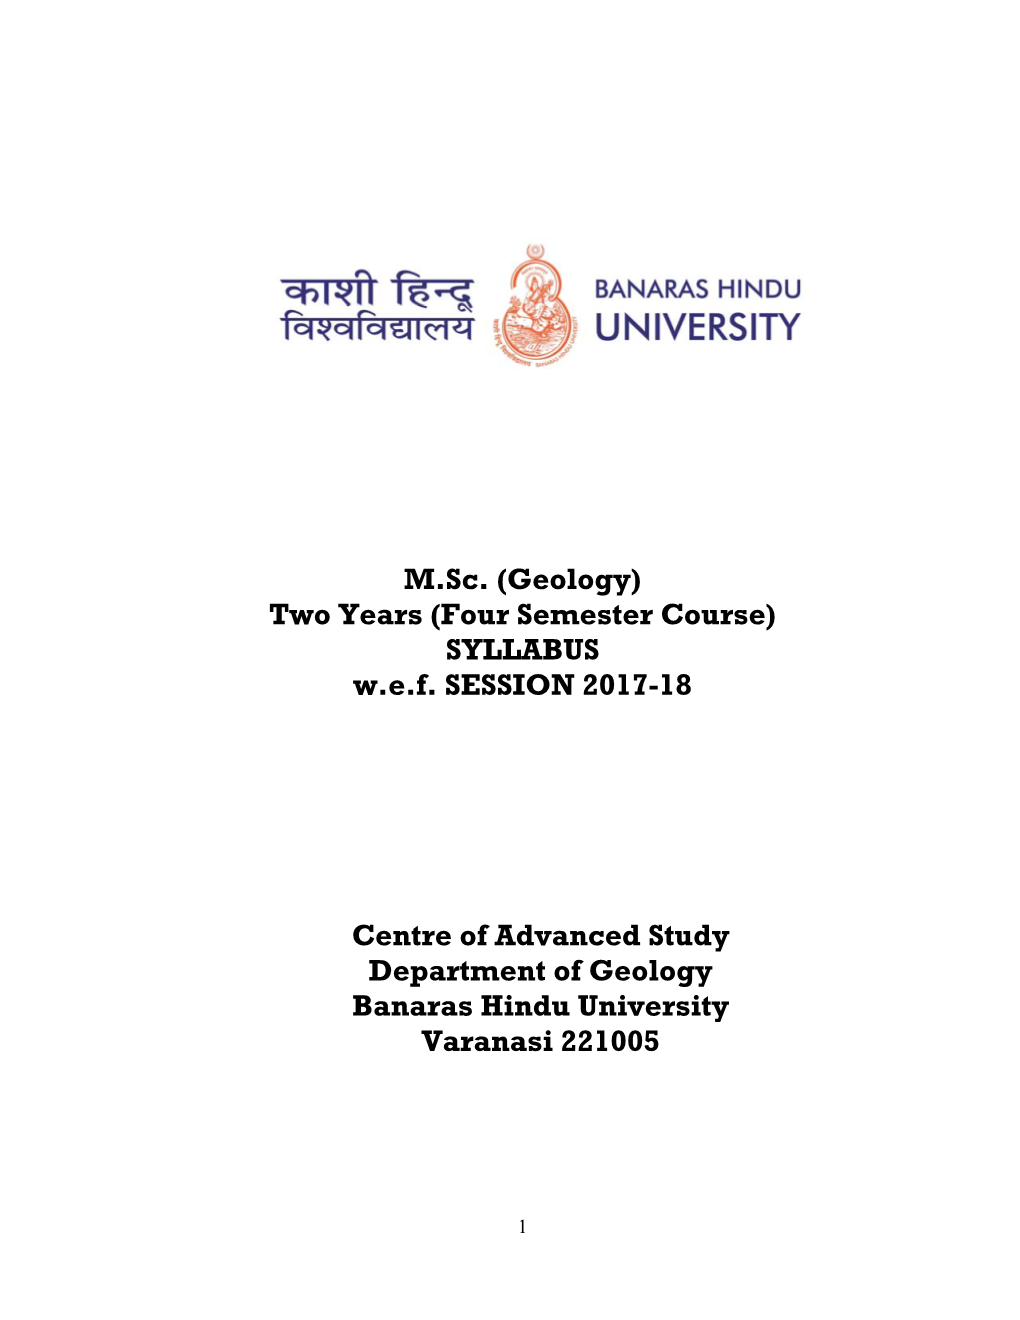 Two Years (Four Semester Course) SYLLABUS Wef SESSION 2017-18 Centre of Advanced Study Department of Geology